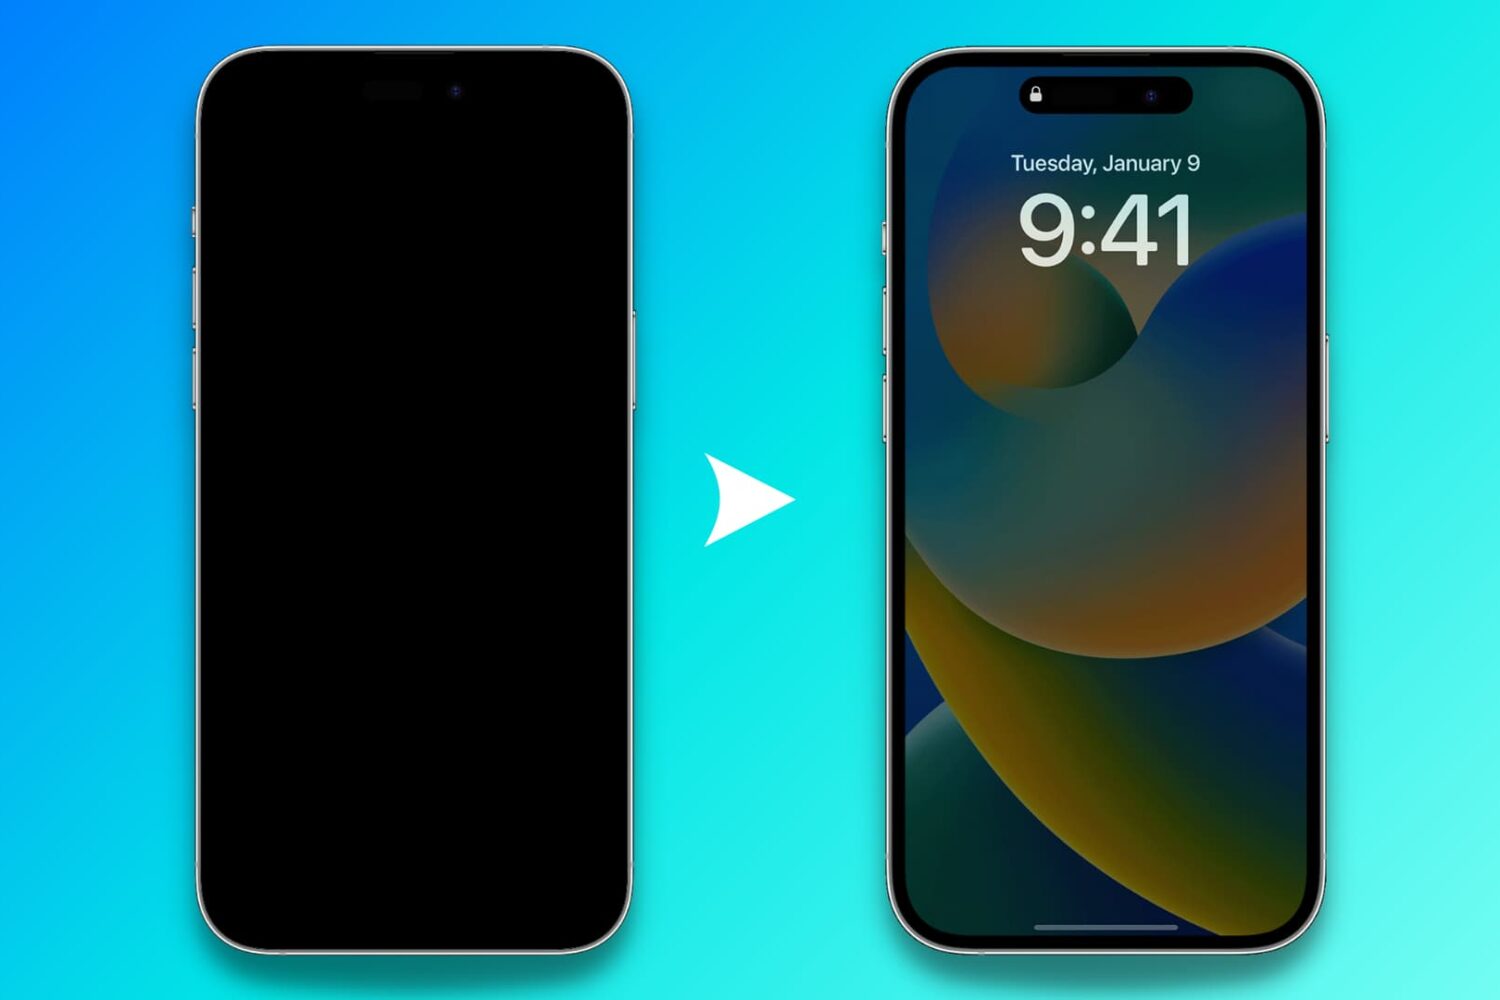 Two iPhone mockups with one showing the all black screen and one with the Always-On display active